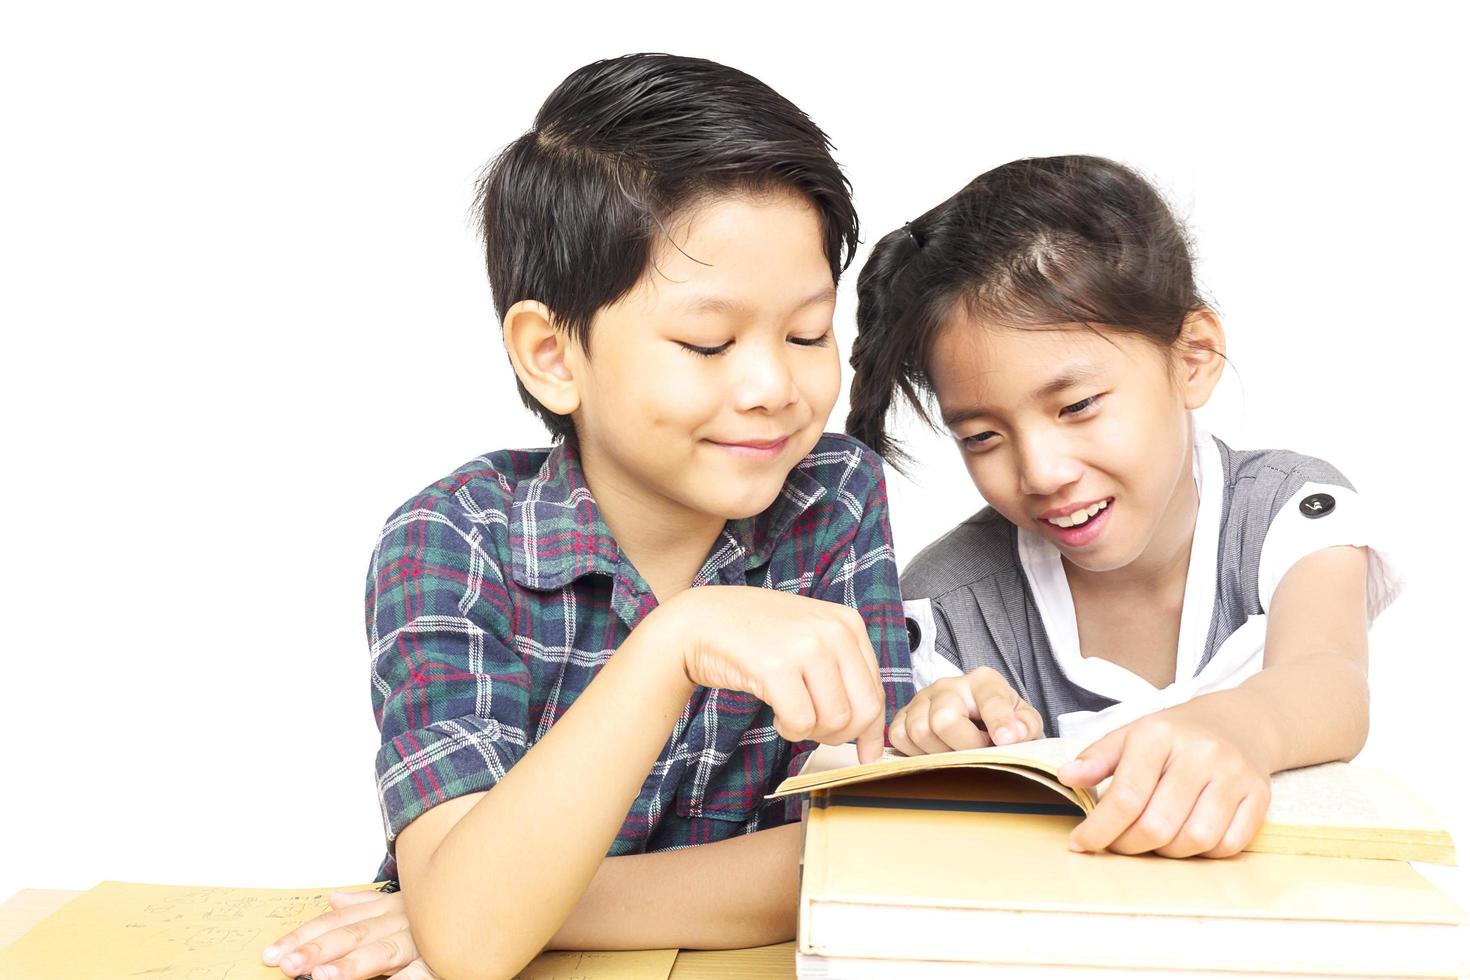 Kid are happily reading book together isolated over white background photo